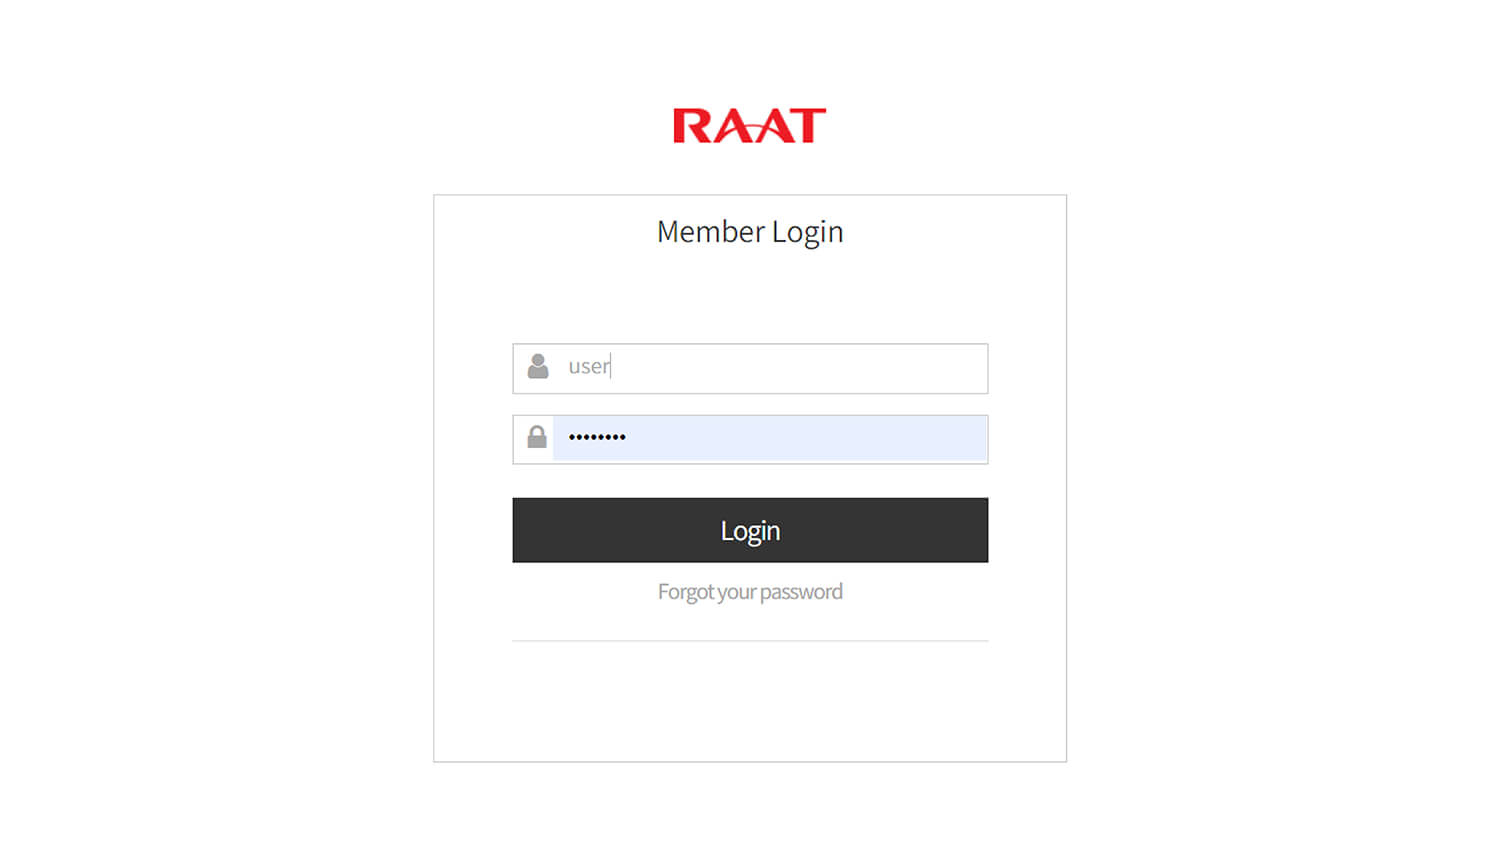 Step 3: To login enter your username and password.
Then press LOGIN.